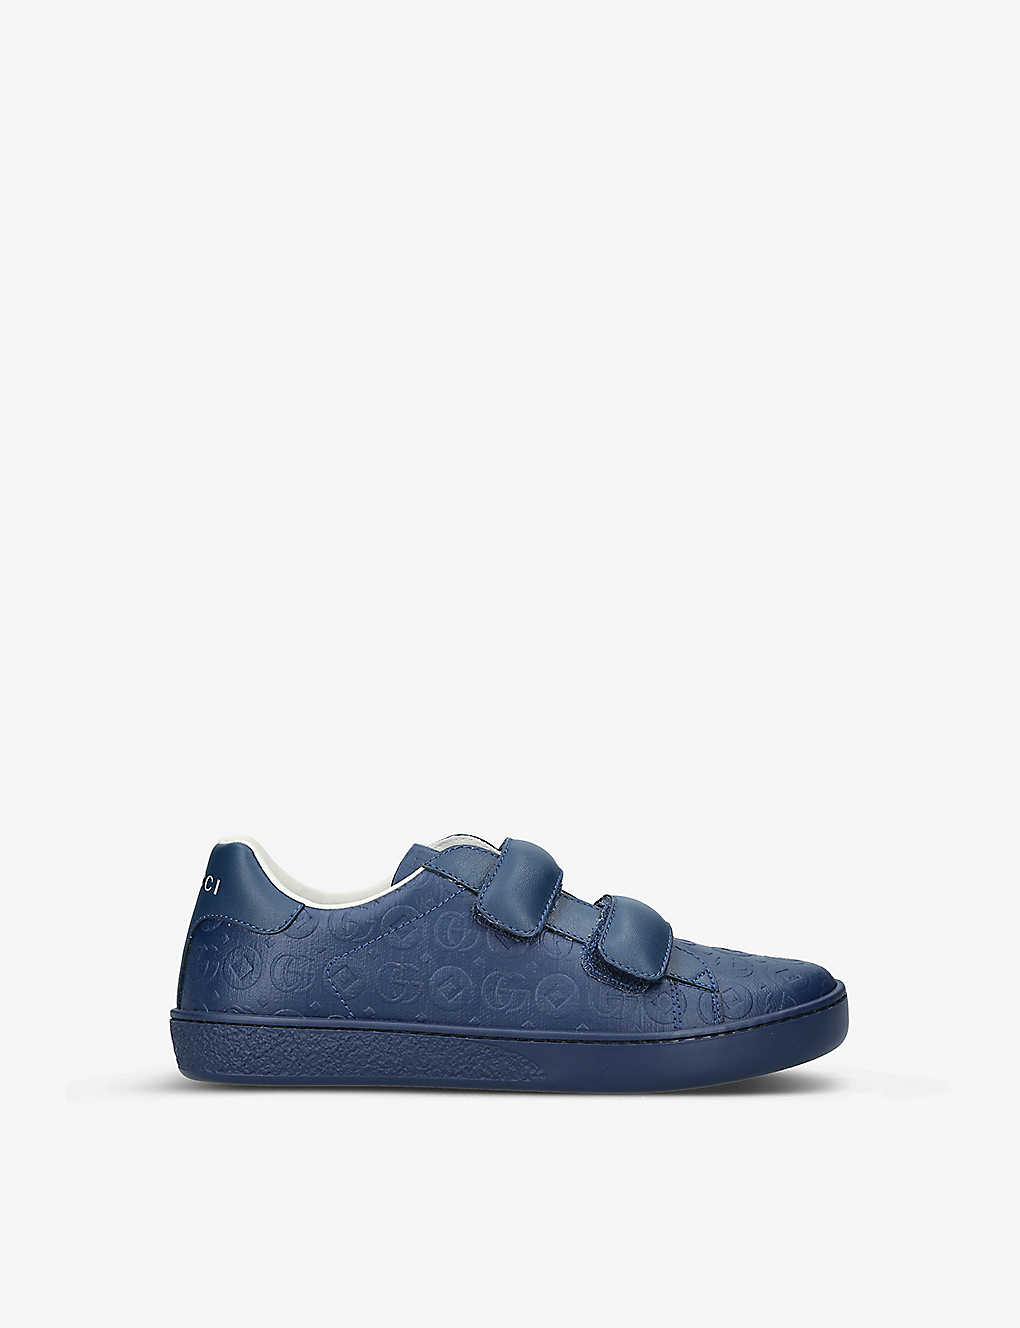 Gucci Boys Navy Kids New Ace Embossed Leather Trainers 5-10 Years